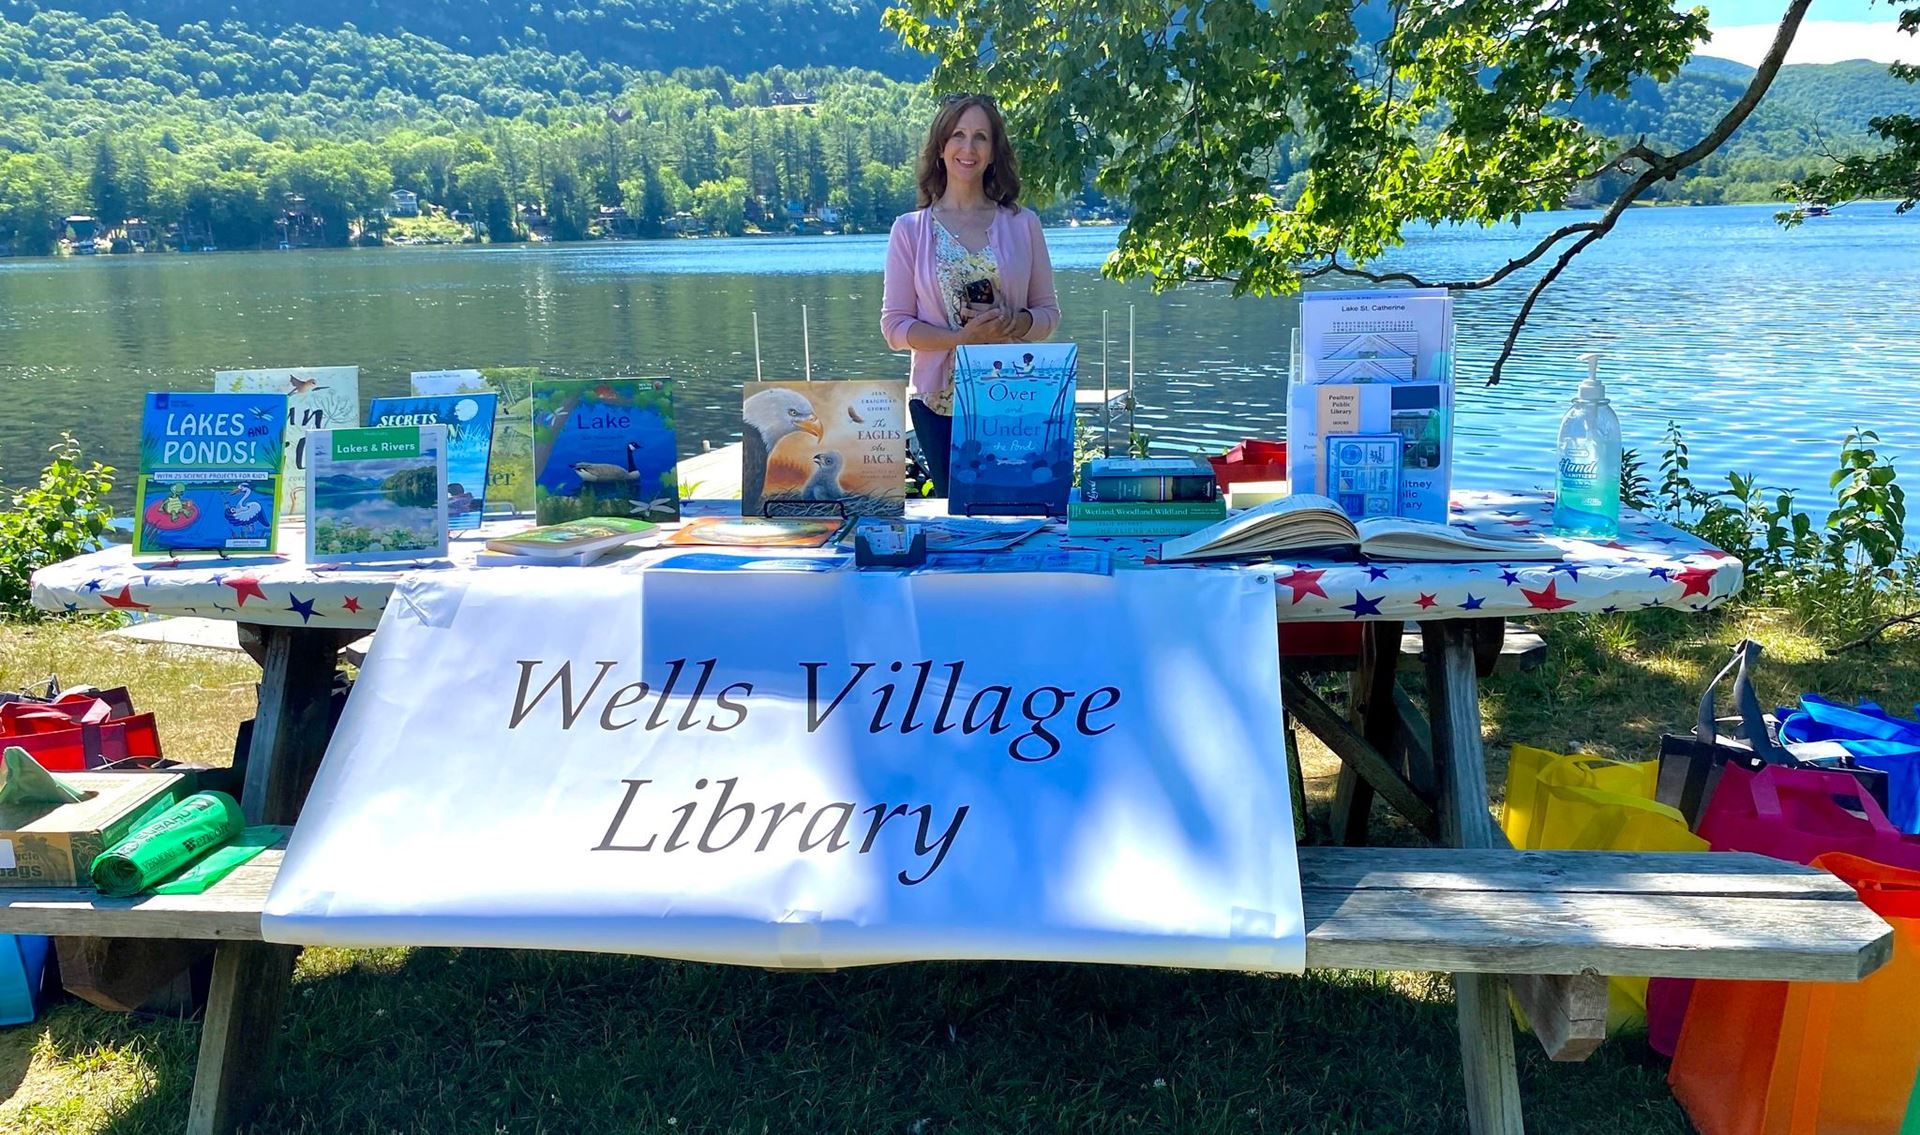 Wells Village Library - Libraries Love Lakes Event On Lake St. Catherine